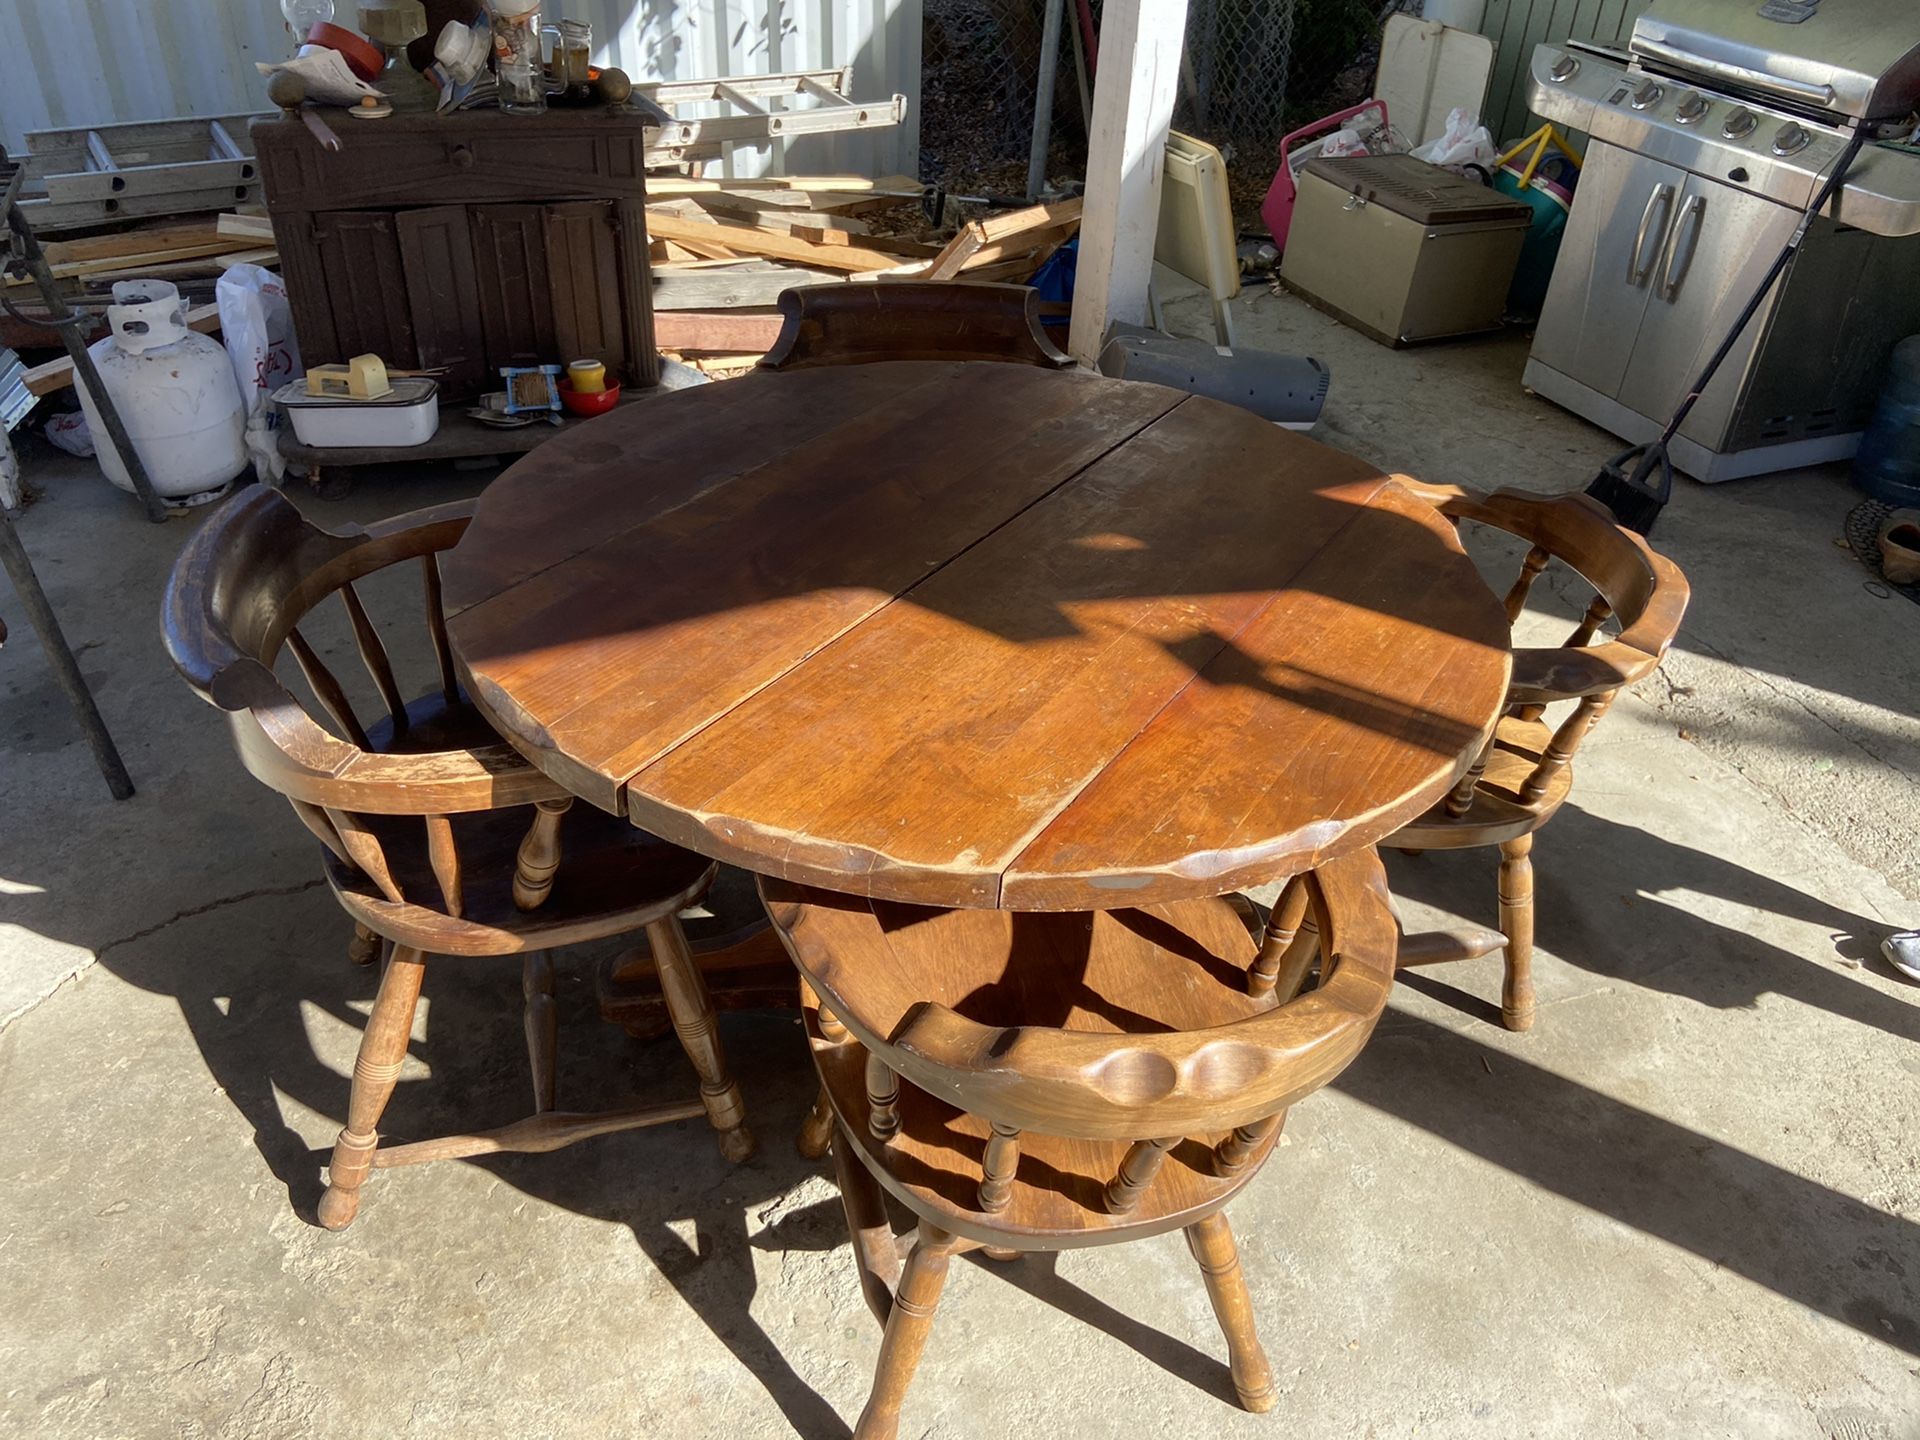 Dining room set (table and chairs)